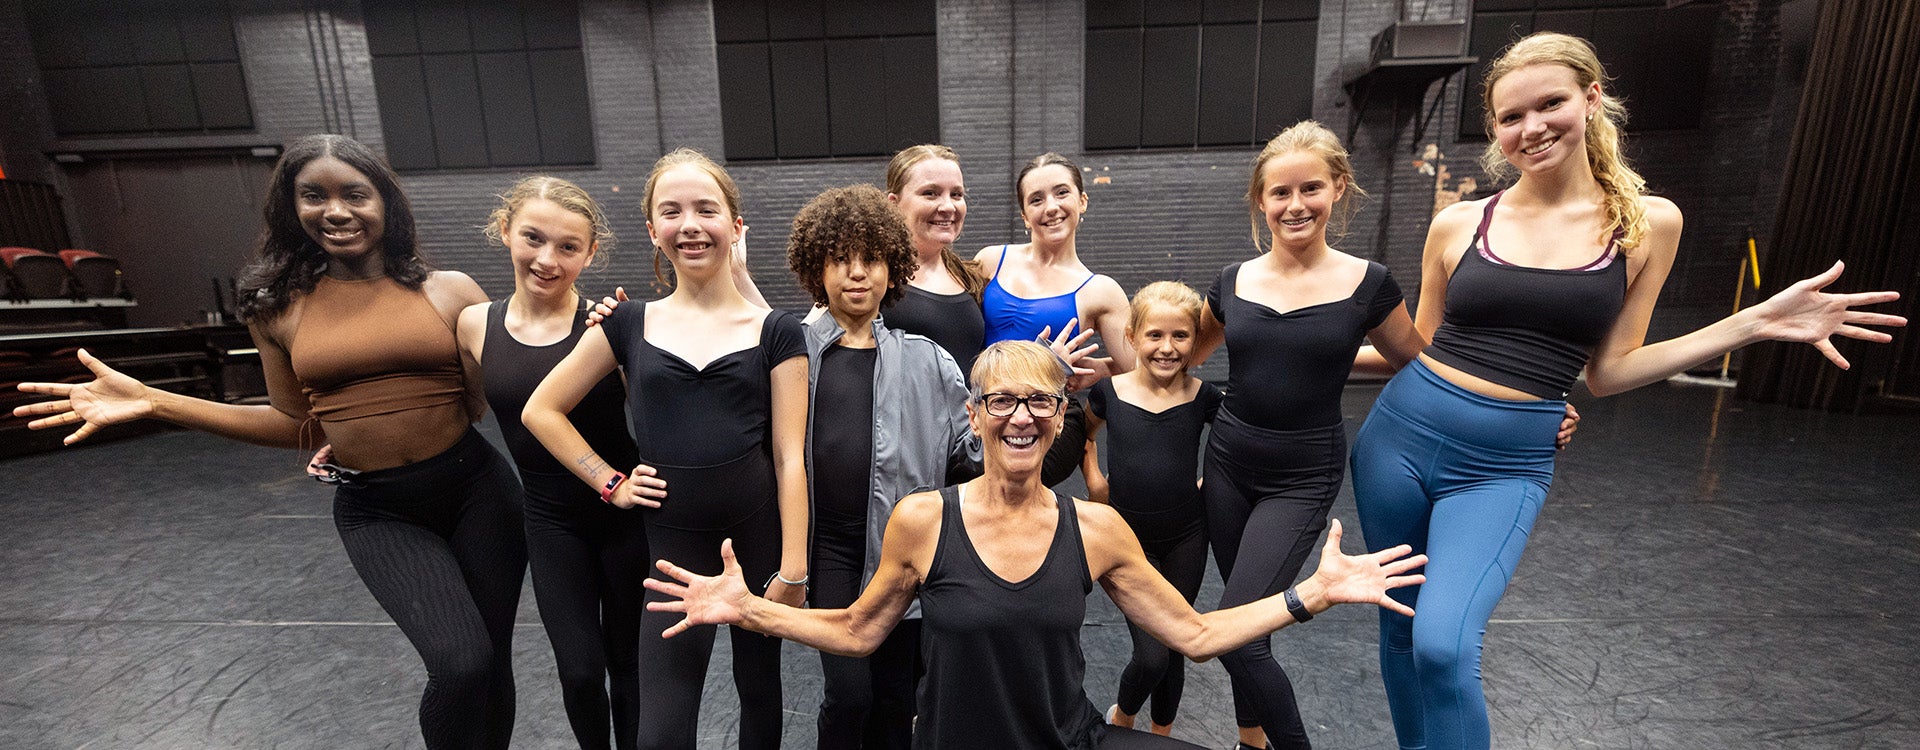 Jazz Dance Camp participants gather for a class photo with instructors Tommi Galaska, center, and ECU senior dance majors Amani Faulk, far left, and Samantha Pabst, far right.